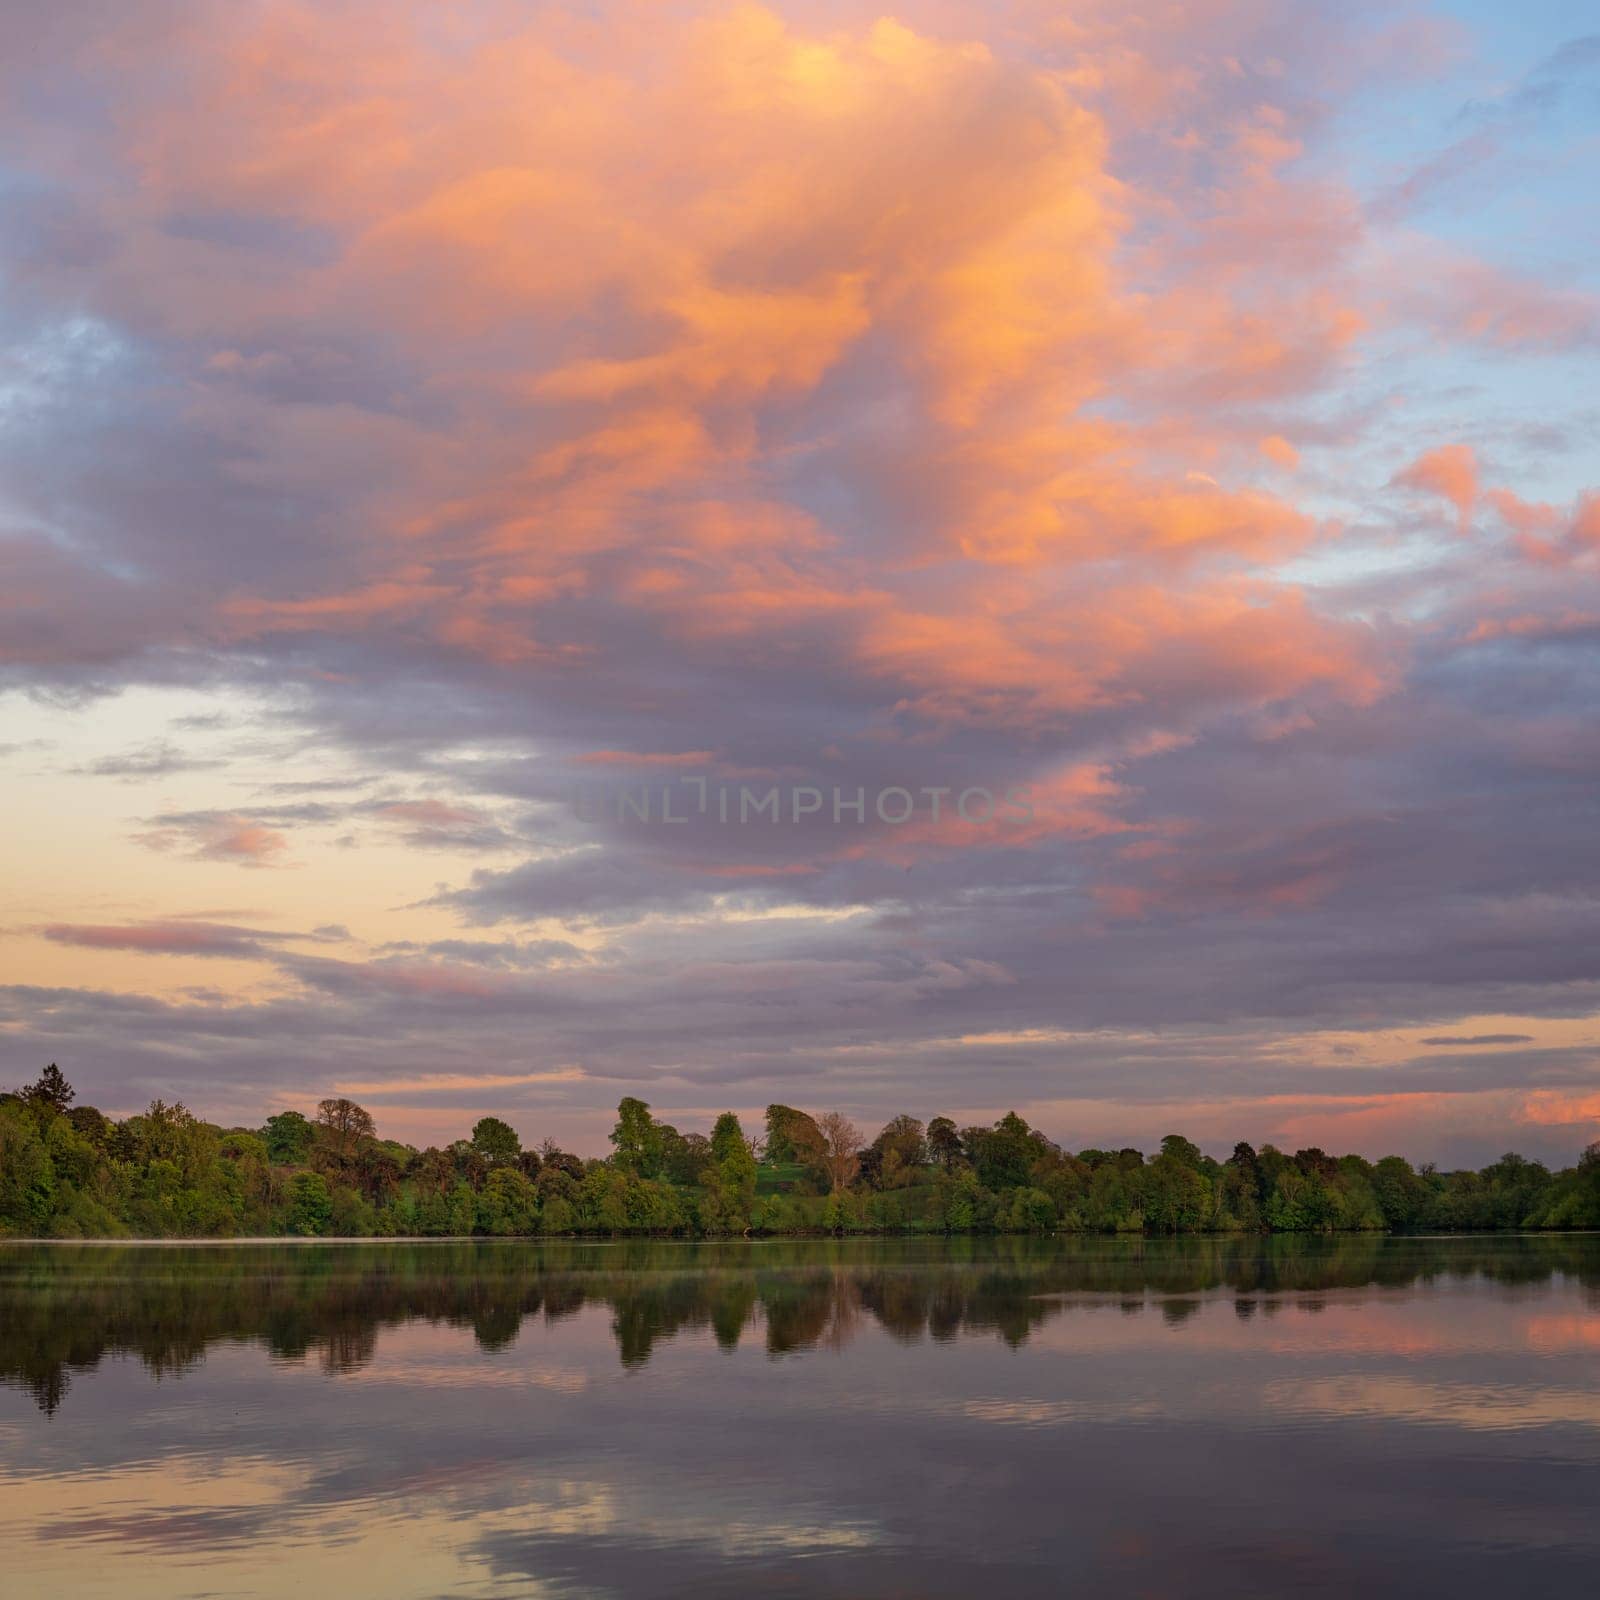 View across the Ellesmere Mere to a clear reflection of distant trees by steheap